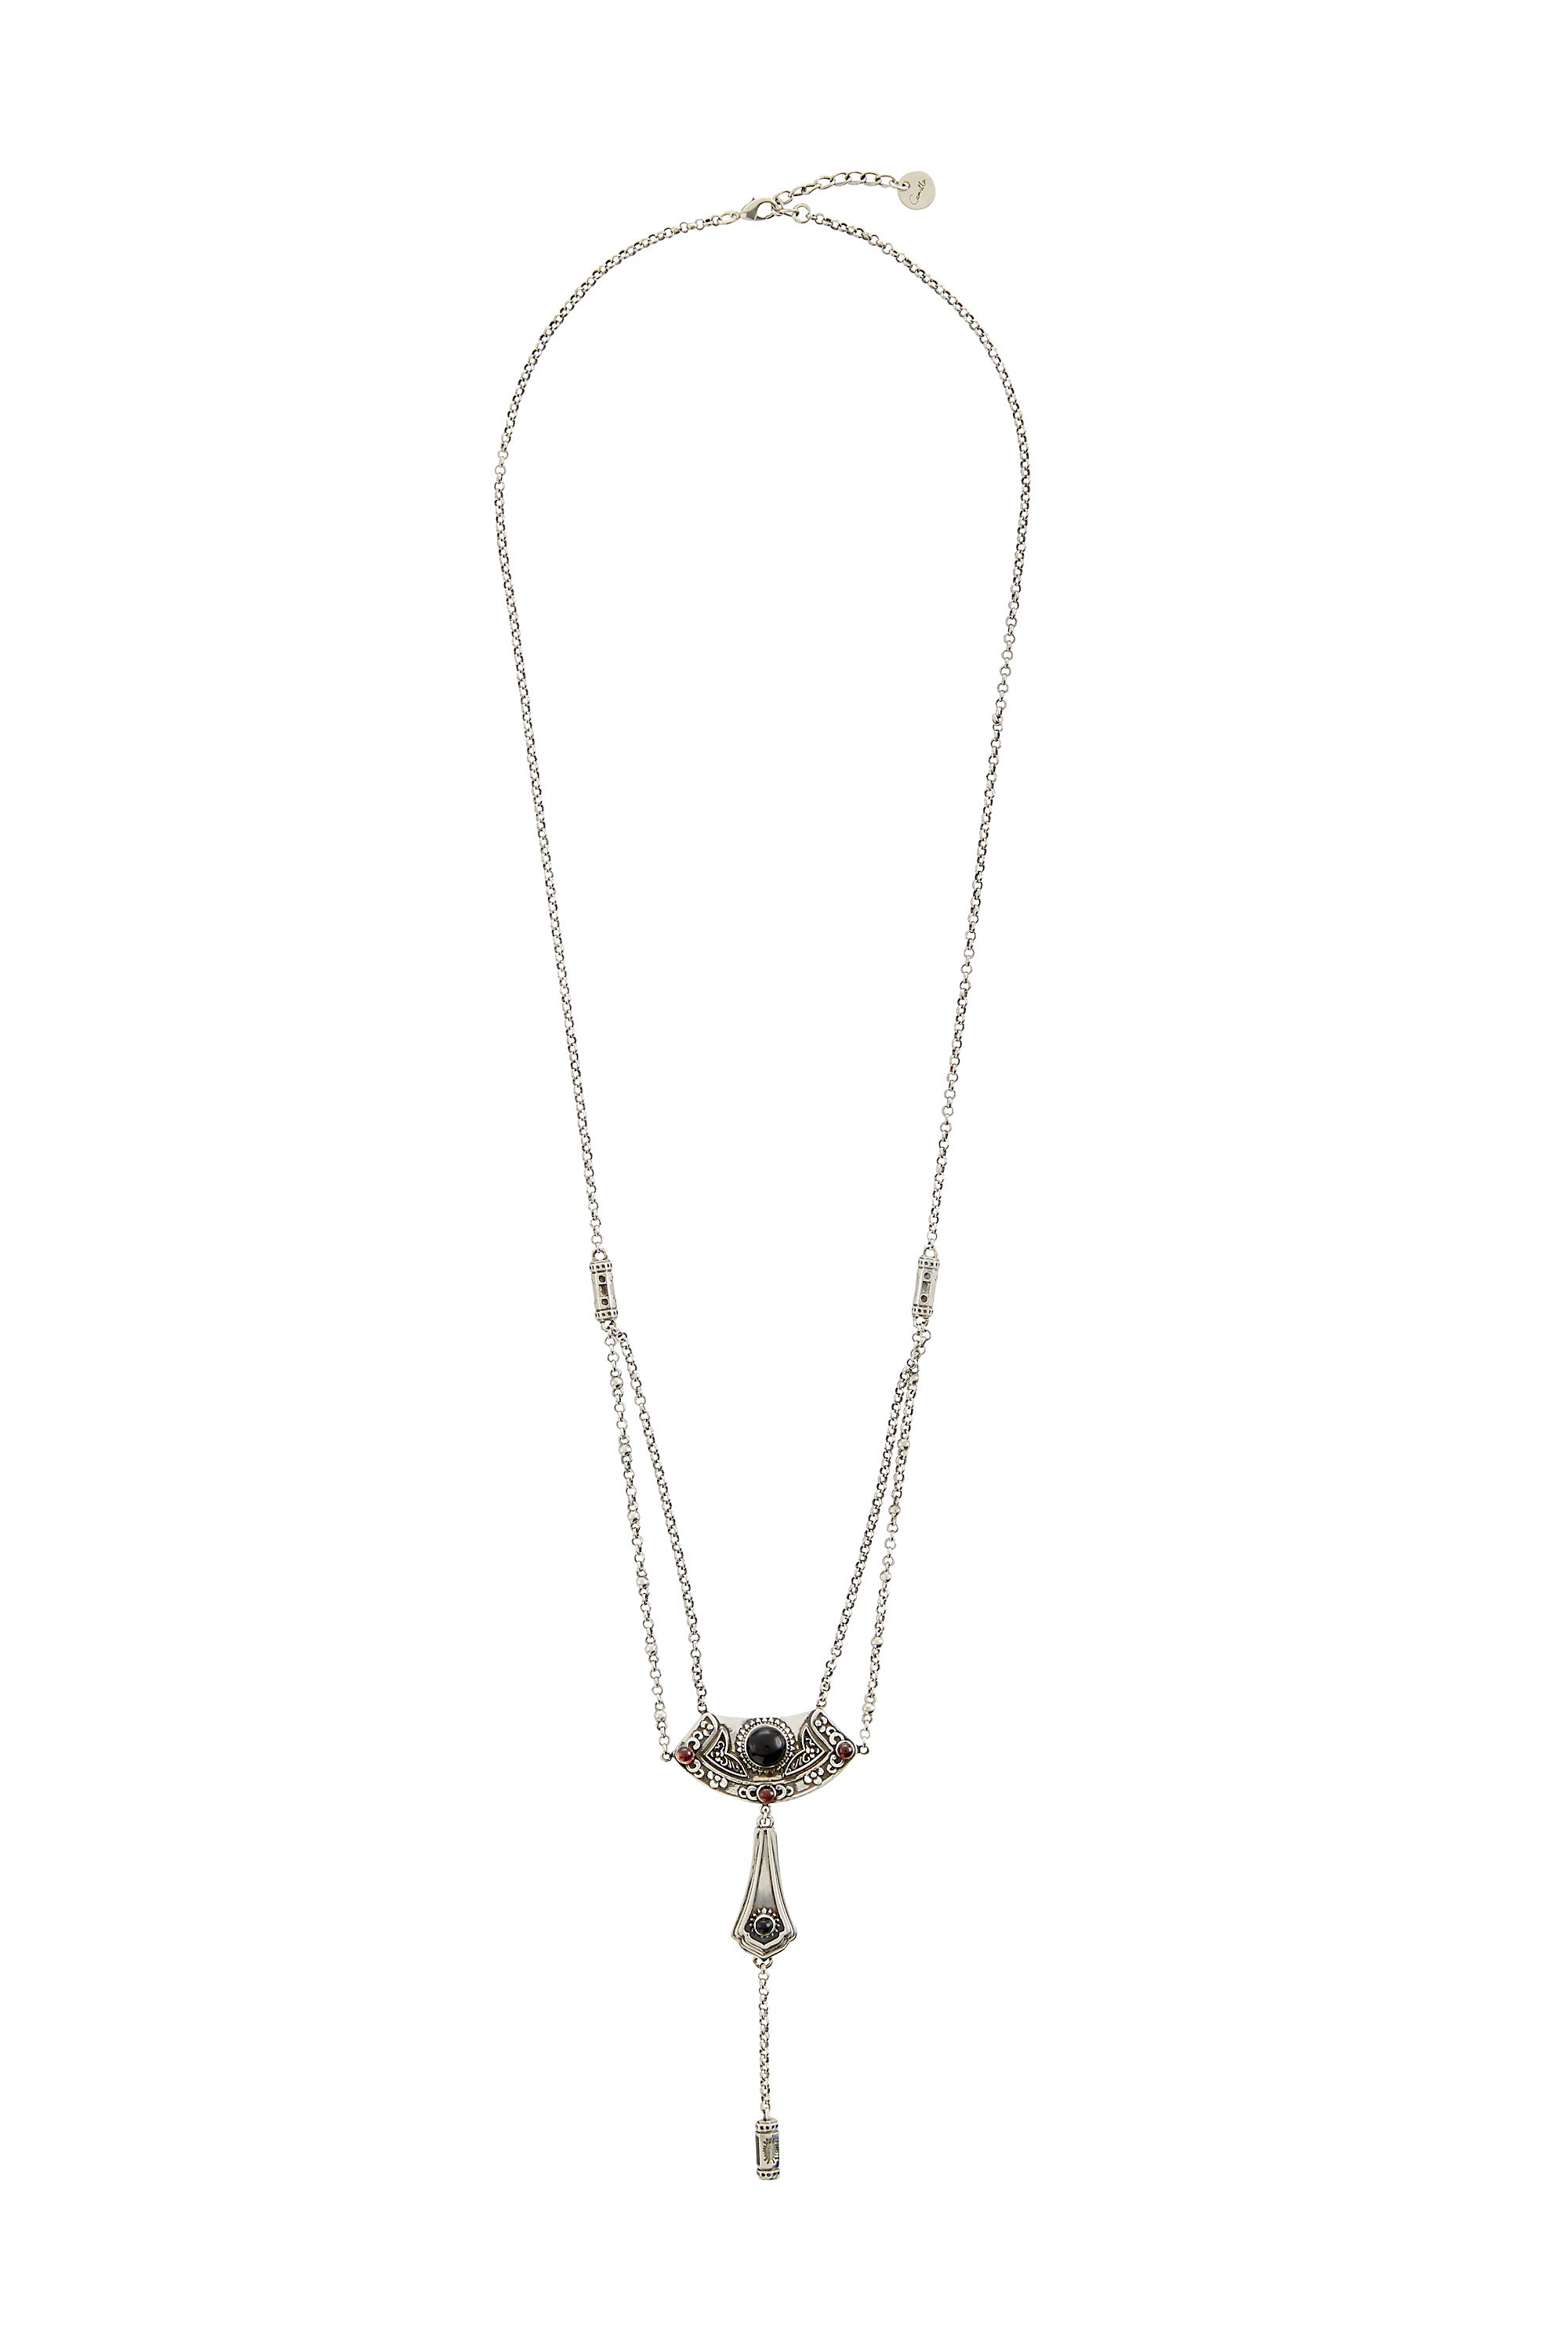 FOR THE LOVE OF LHASA SILV LONG PENDANT